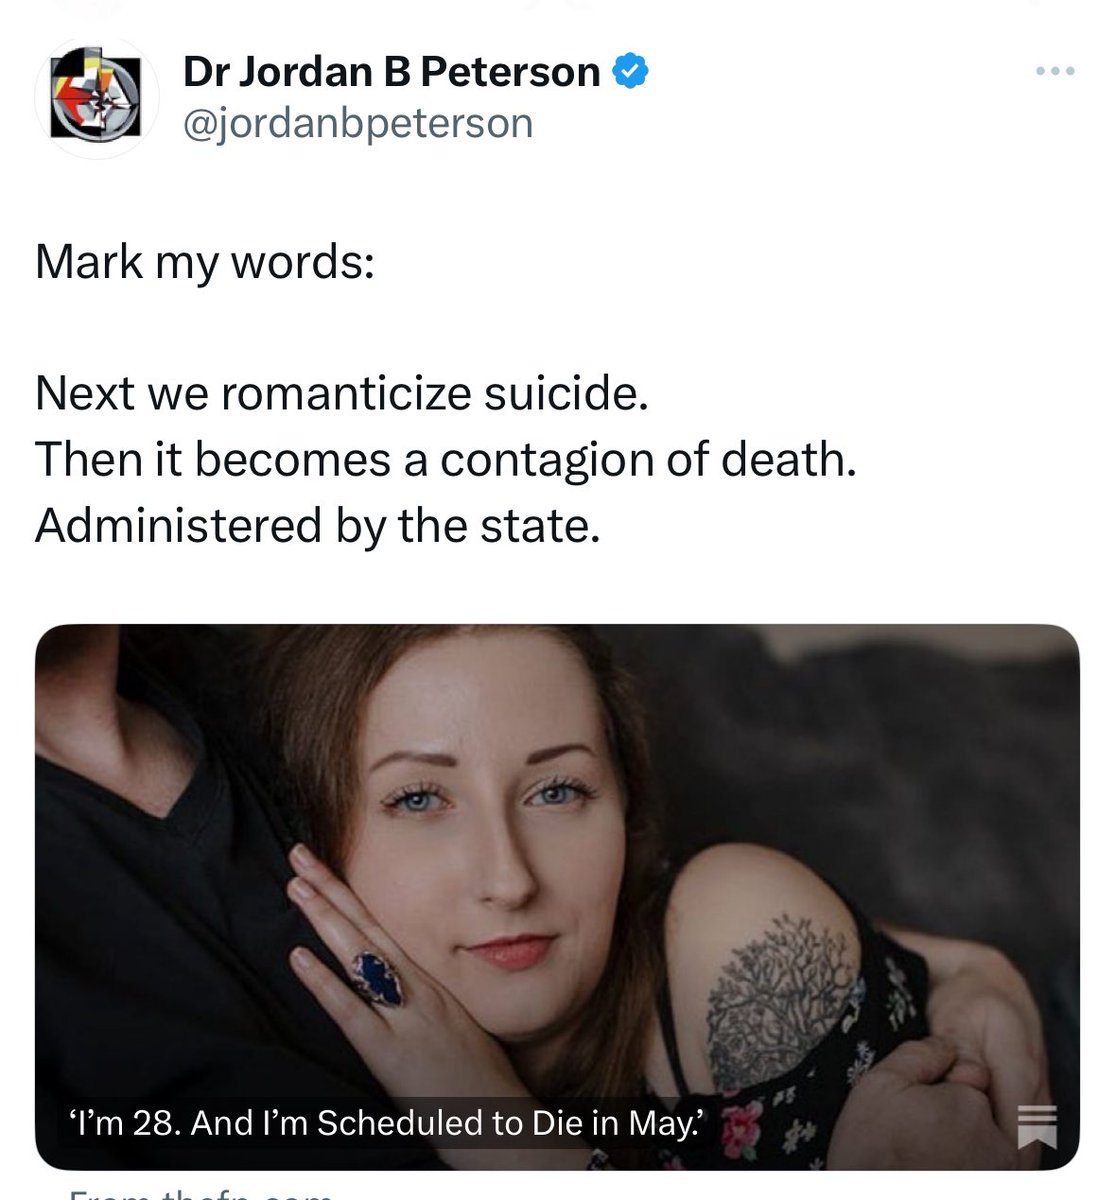 First we approved body mutilation to “treat” gender dysphoria. Now we are approving suicide to “treat” depression, autism, and BPD. Having roots in the mental health field, I am absolutely appalled that Canada promotes and legally assists in suicide as a “solution” to mental…